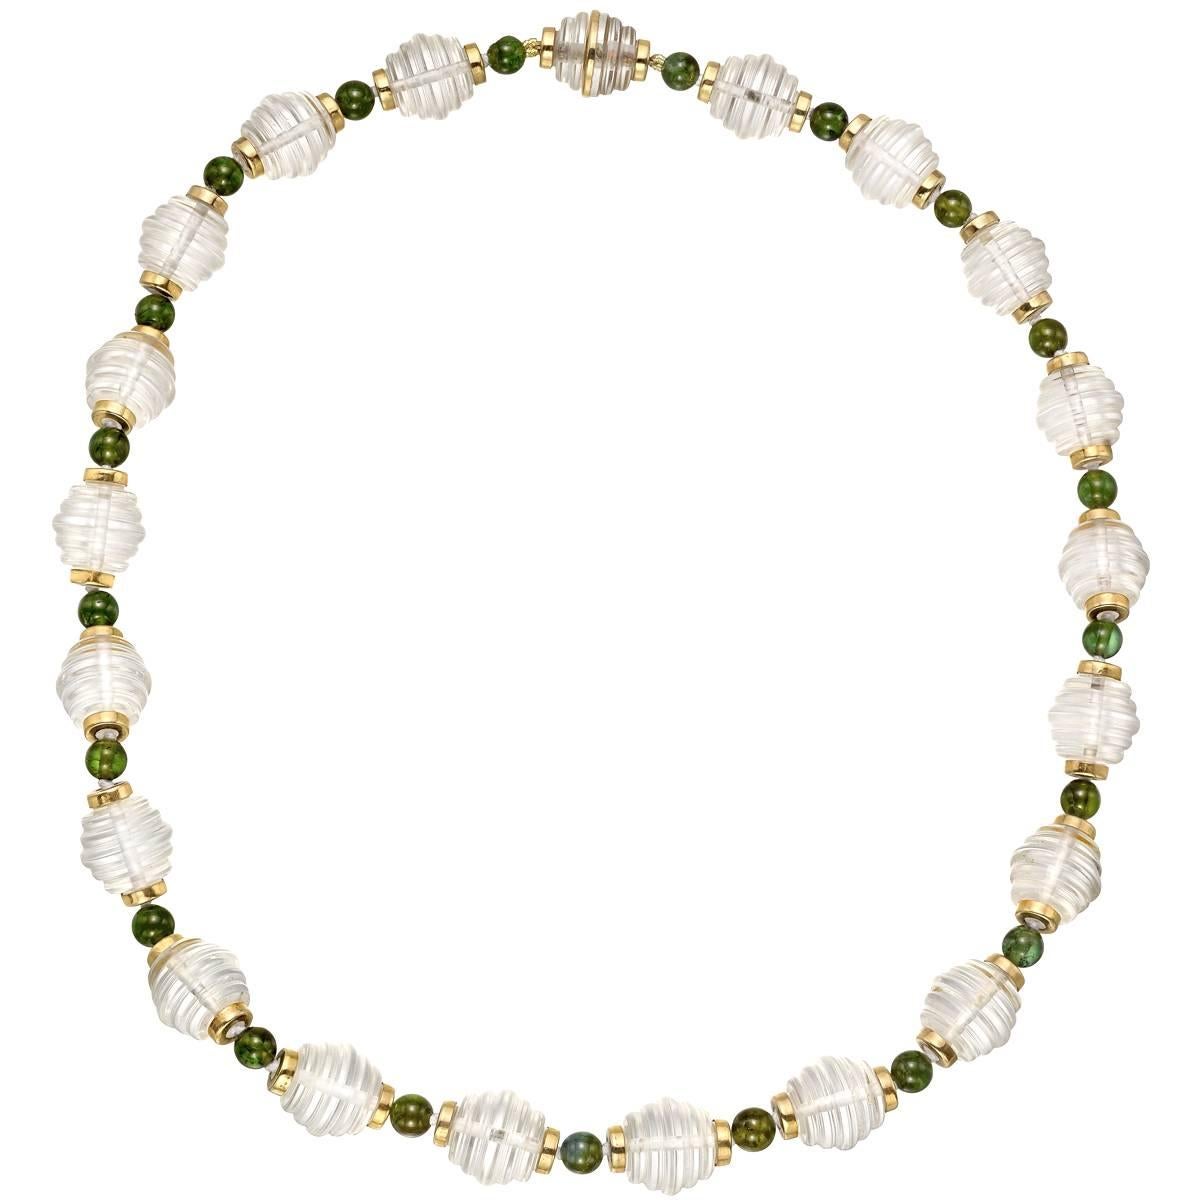 Trianon Rock Crystal and Green Tourmaline Bead Necklace